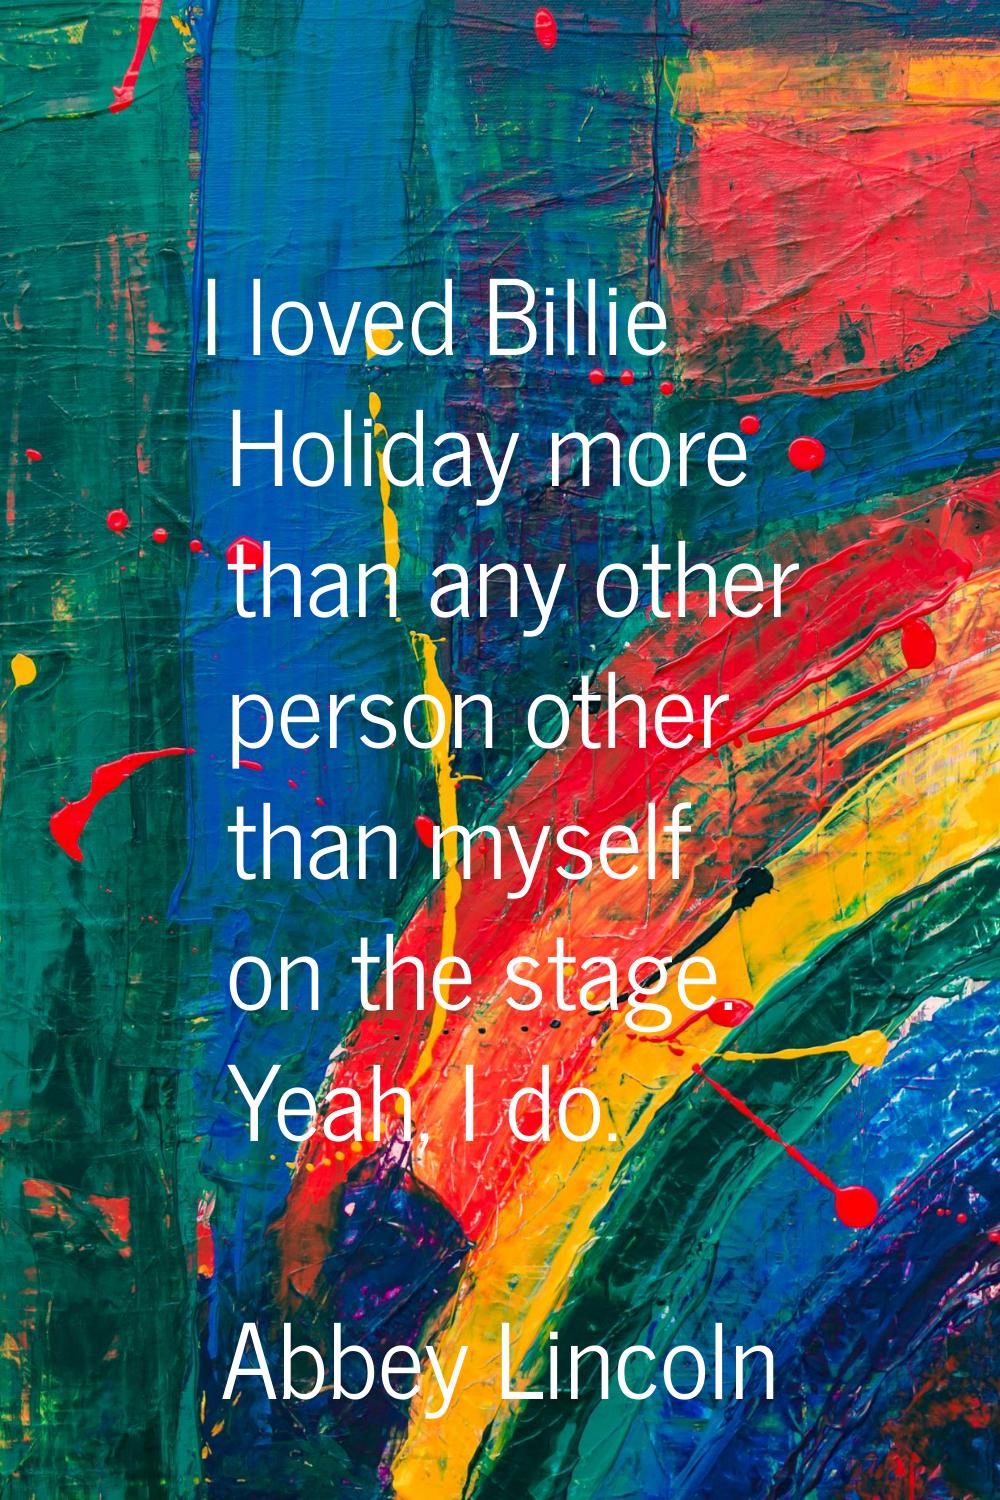 I loved Billie Holiday more than any other person other than myself on the stage. Yeah, I do.